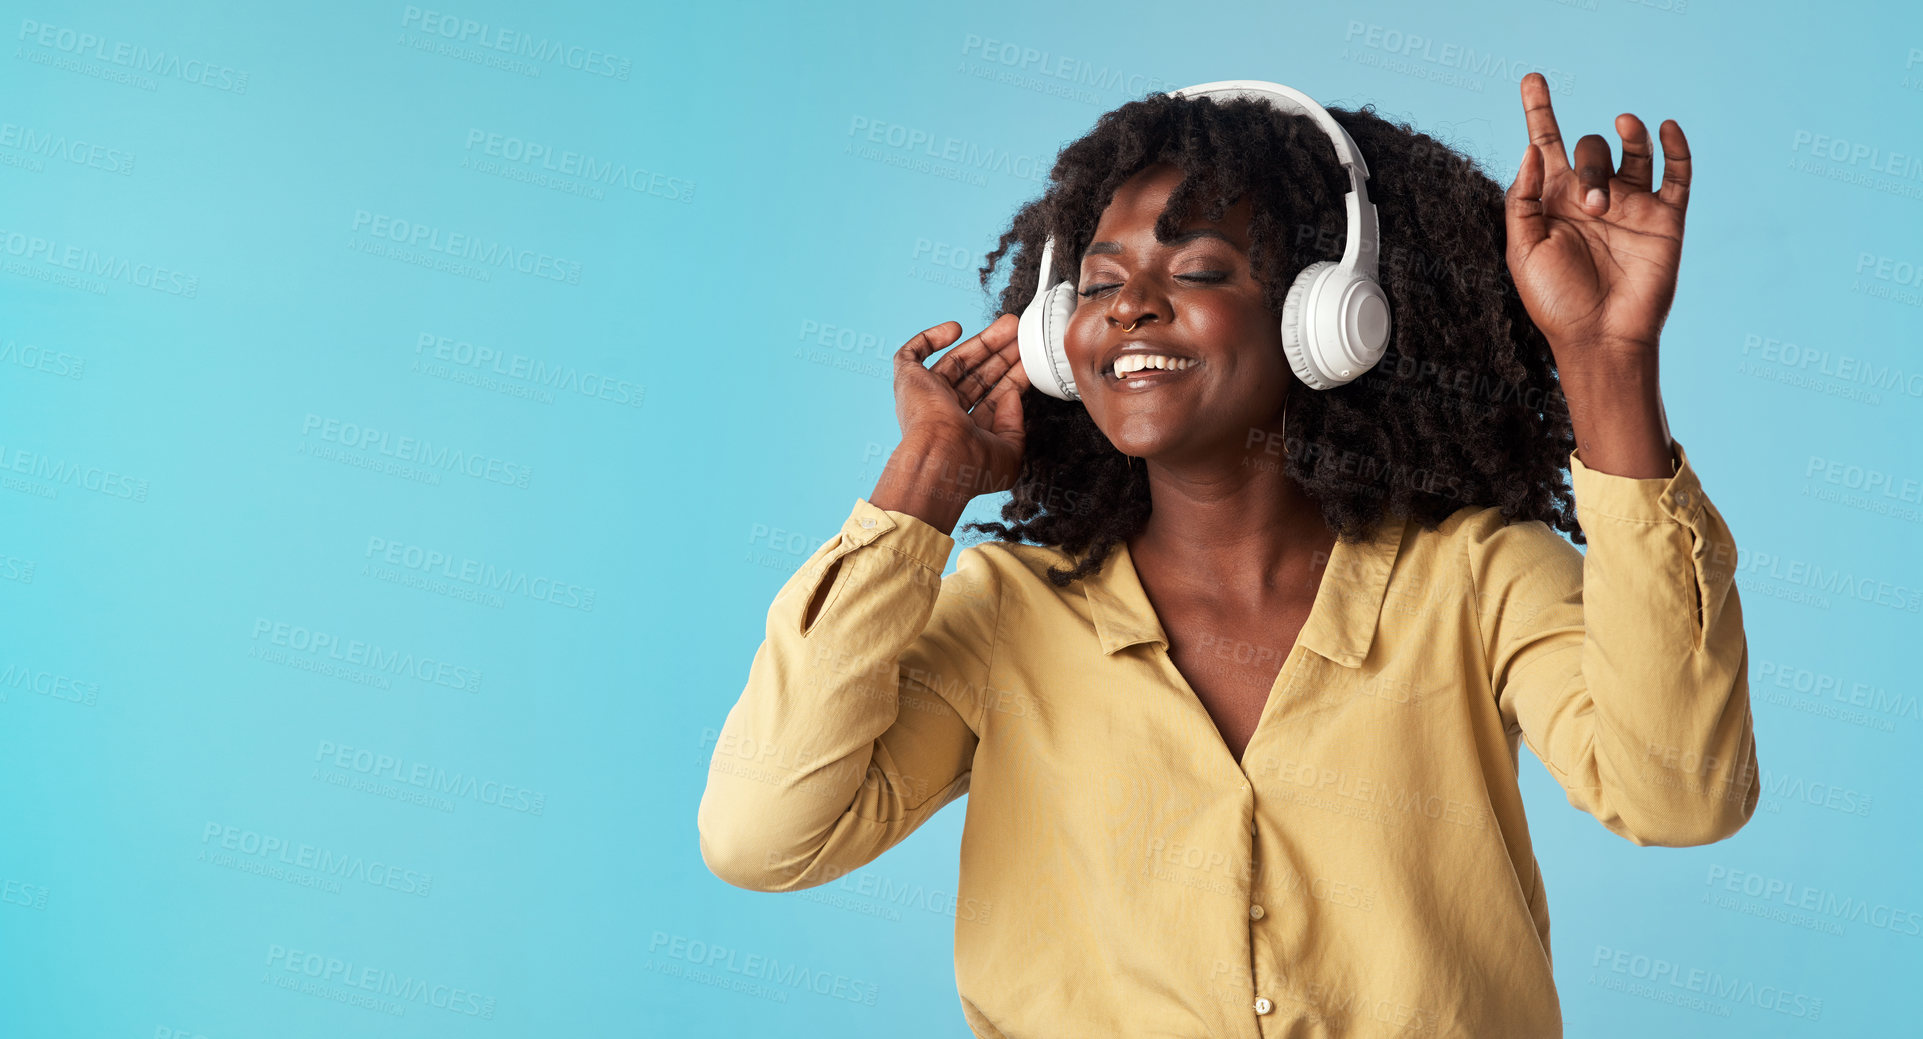 Buy stock photo Studio shot of a young woman using headphones and dancing against a blue background